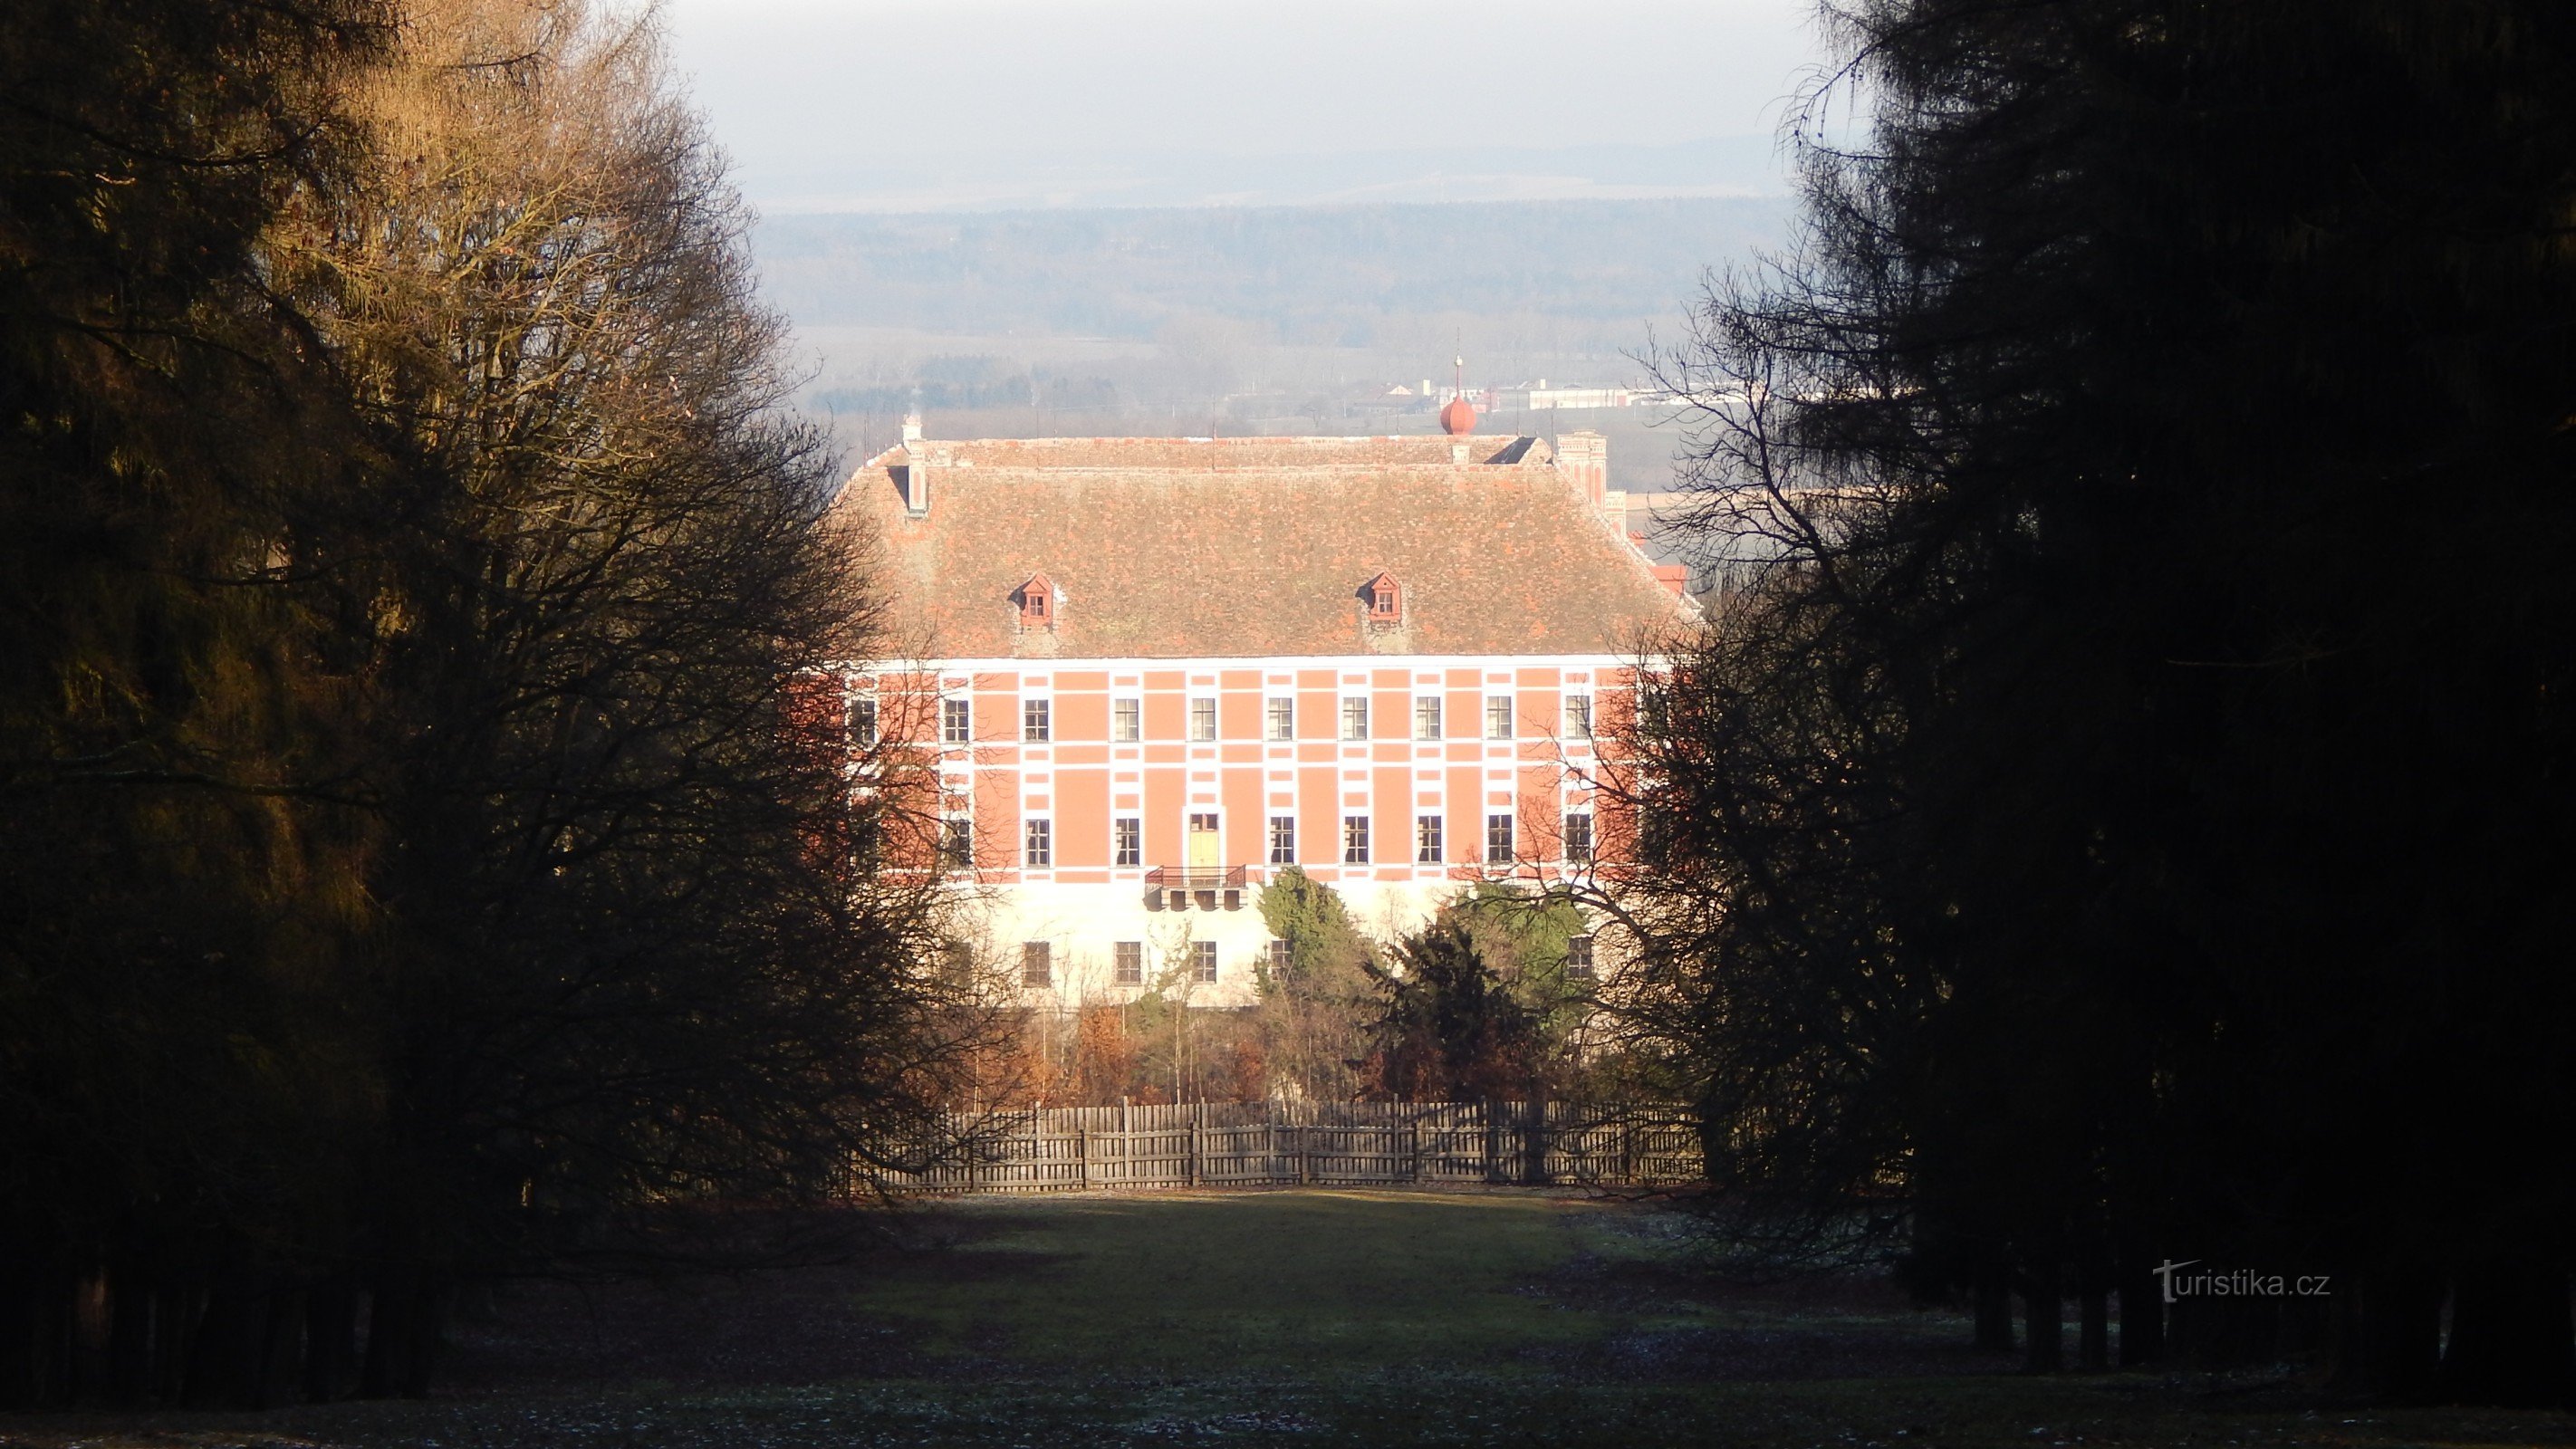 view of the castle from the field